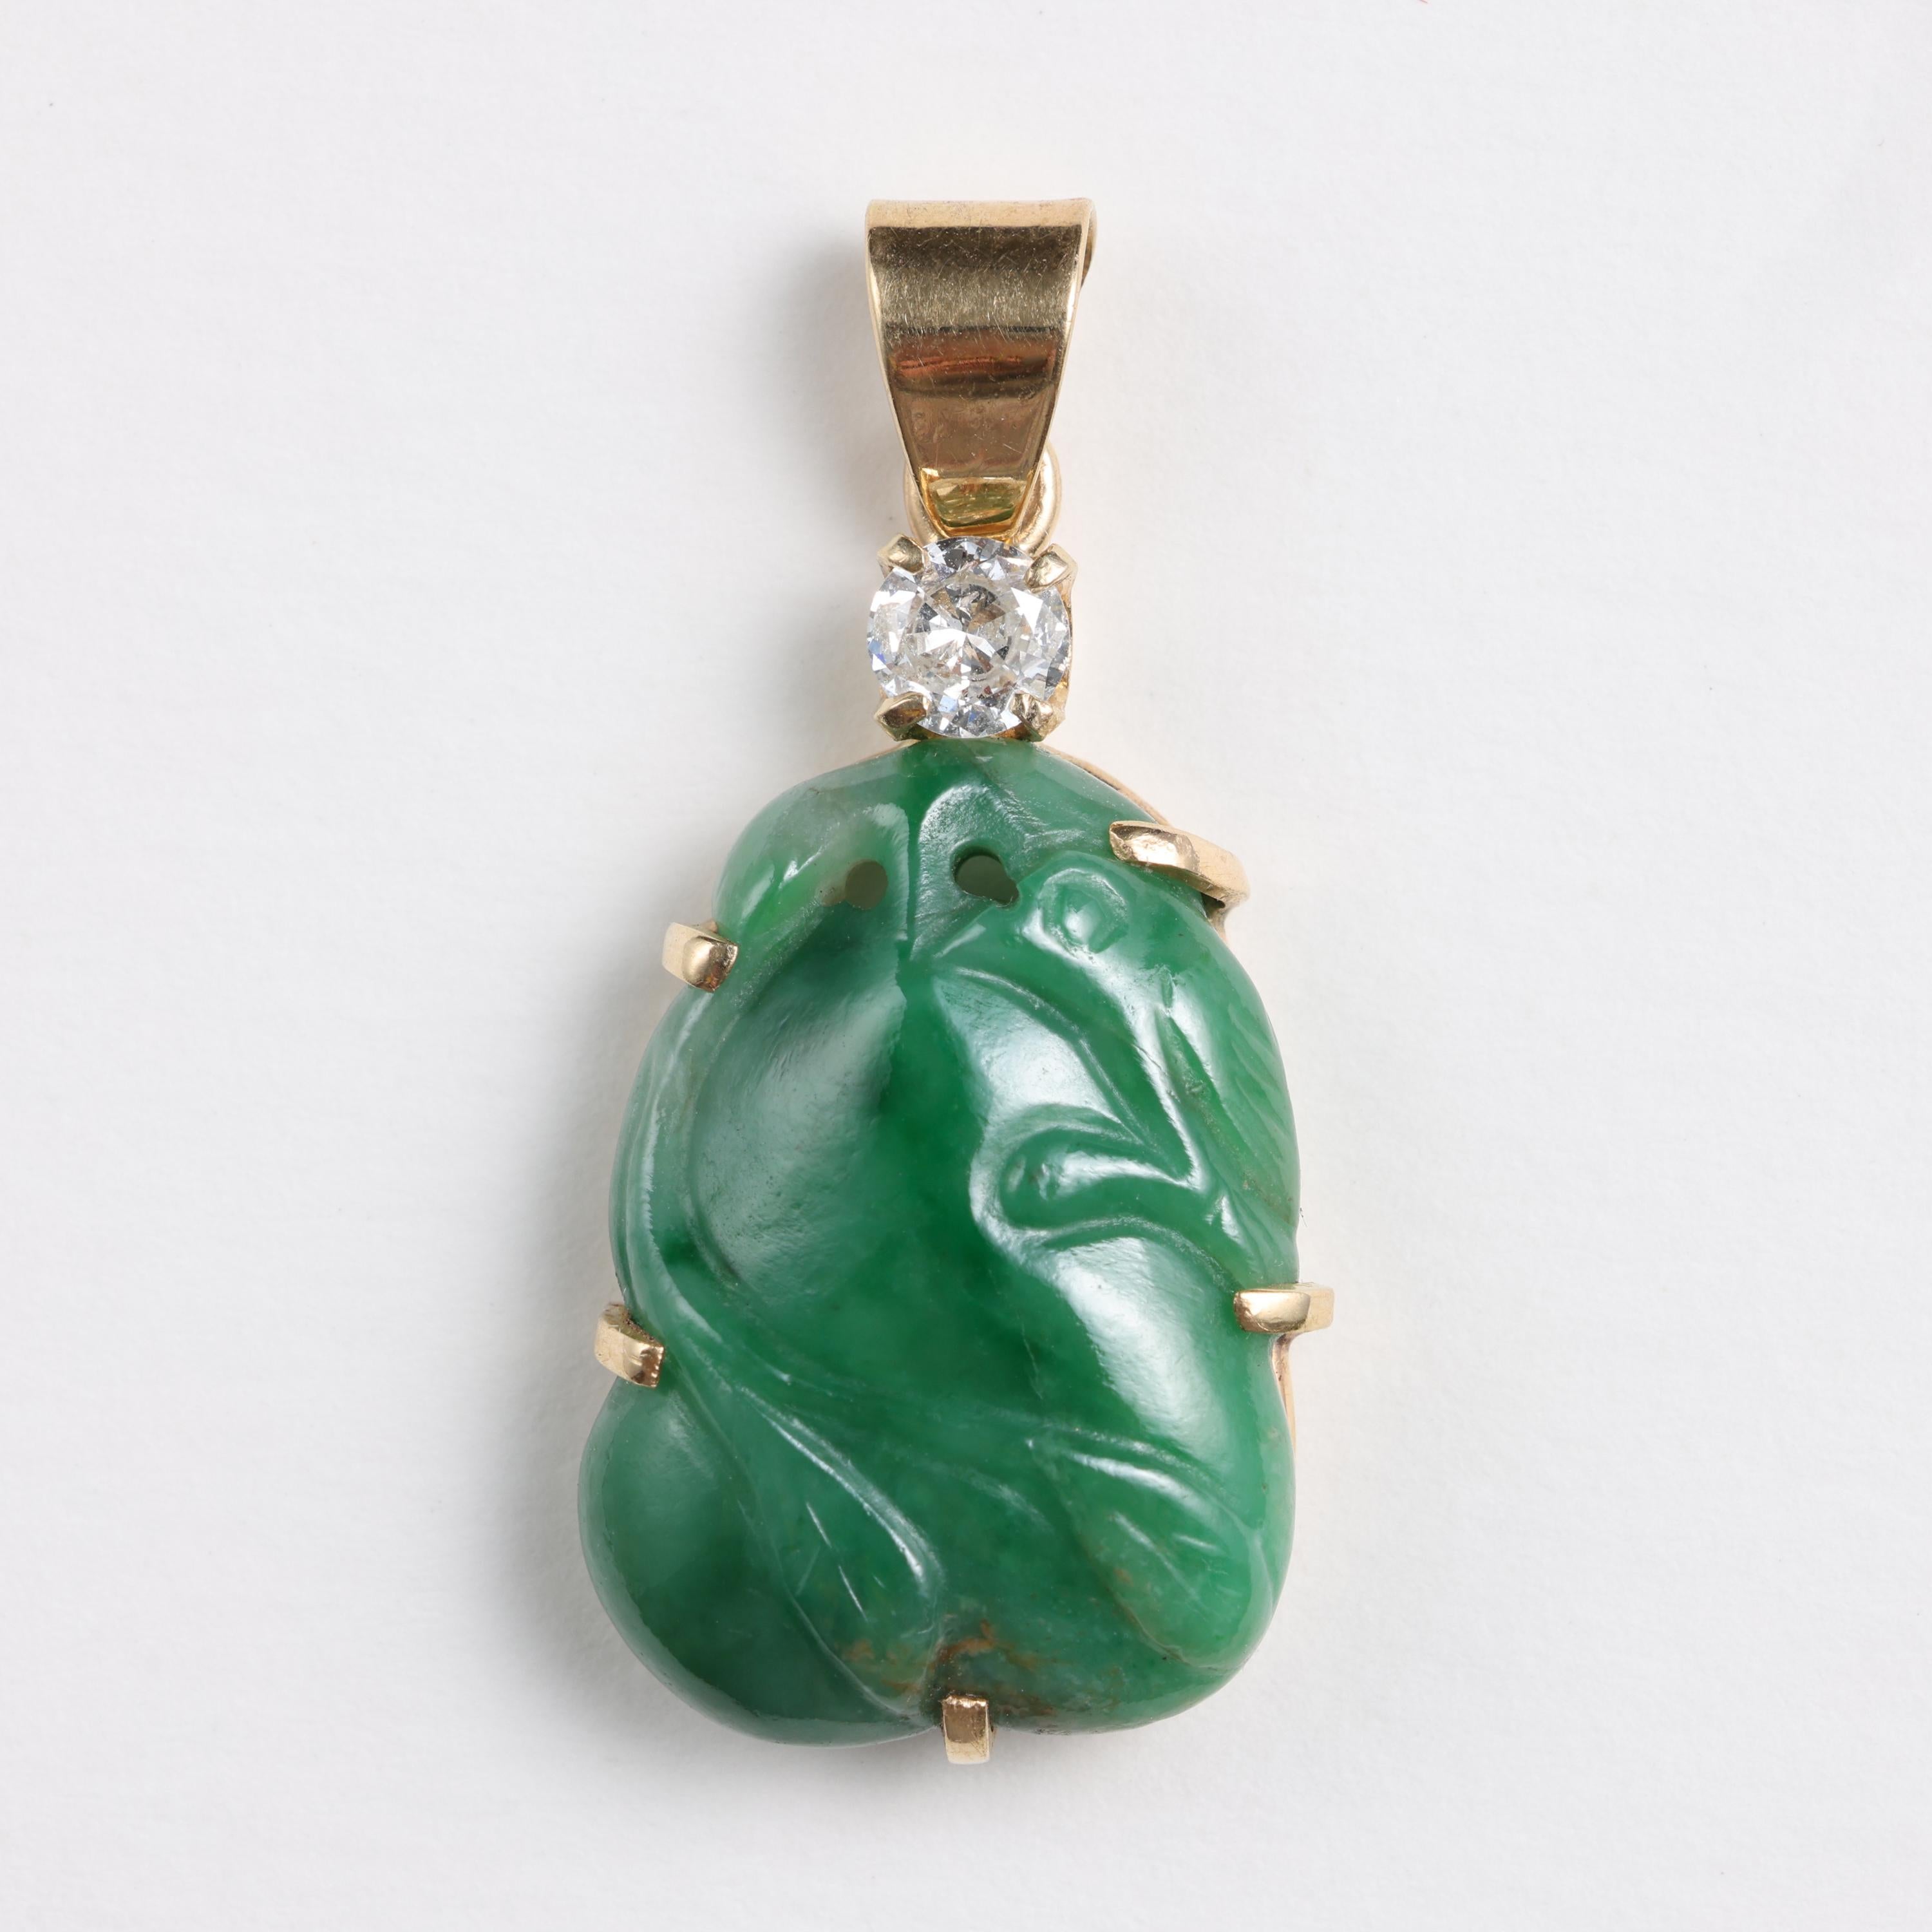 Deep emerald green with a glossy, entirely hand-polished shine, this gorgeous 19th century - early 20th century- carved jadeite jade stone is set into a later, exceedingly simple handmade 14K yellow gold mounting that includes four strong prongs to